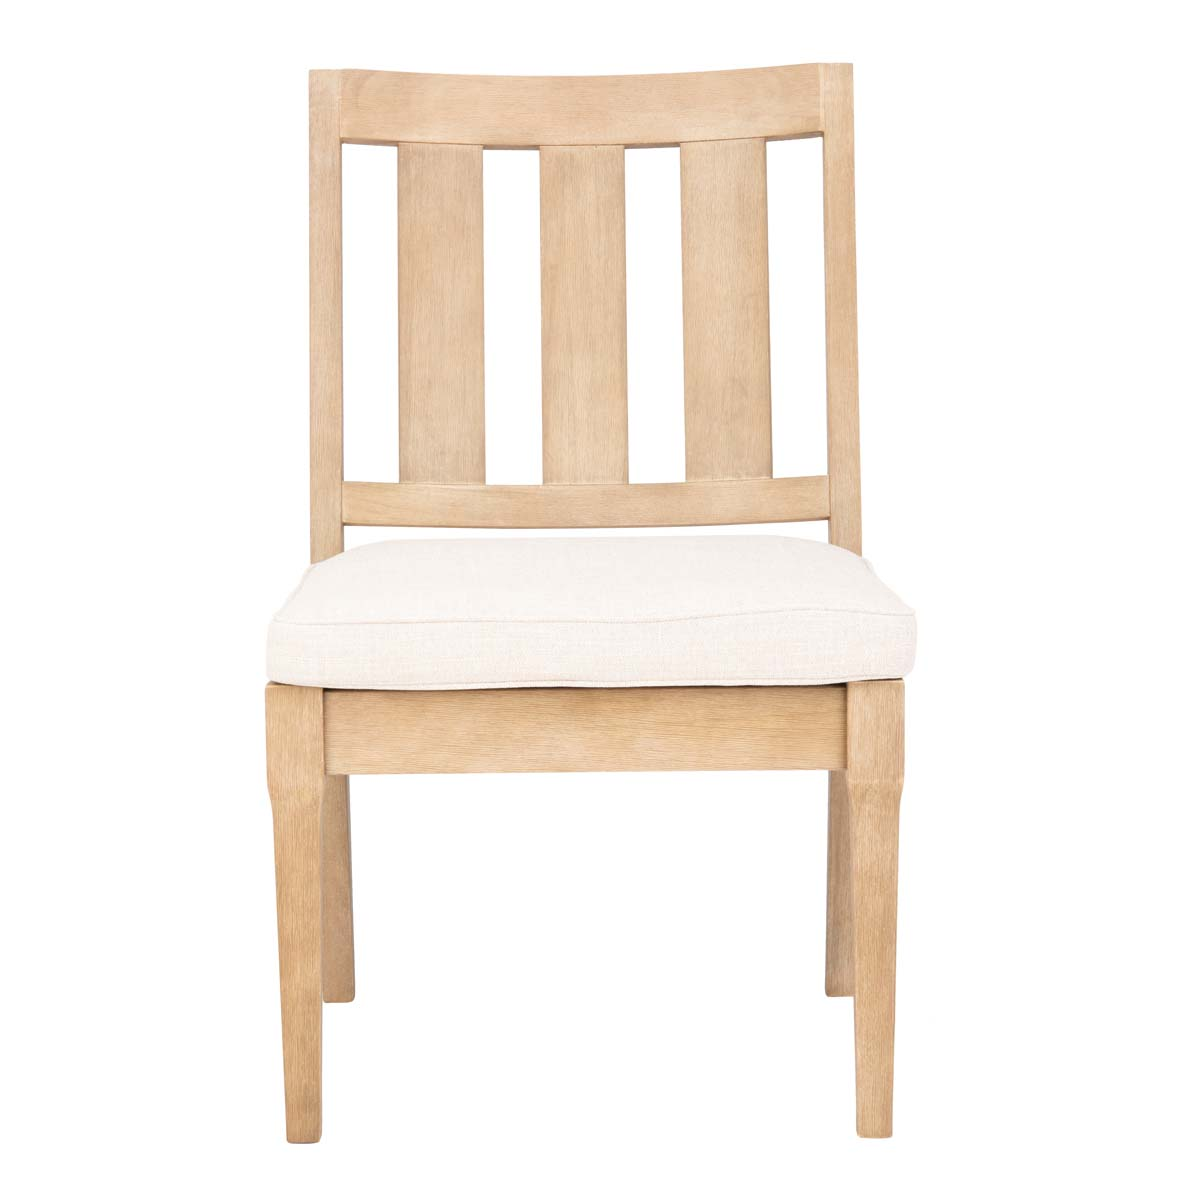 Safavieh Couture Dominica Wooden Outdoor Dining Chair - Natural / White